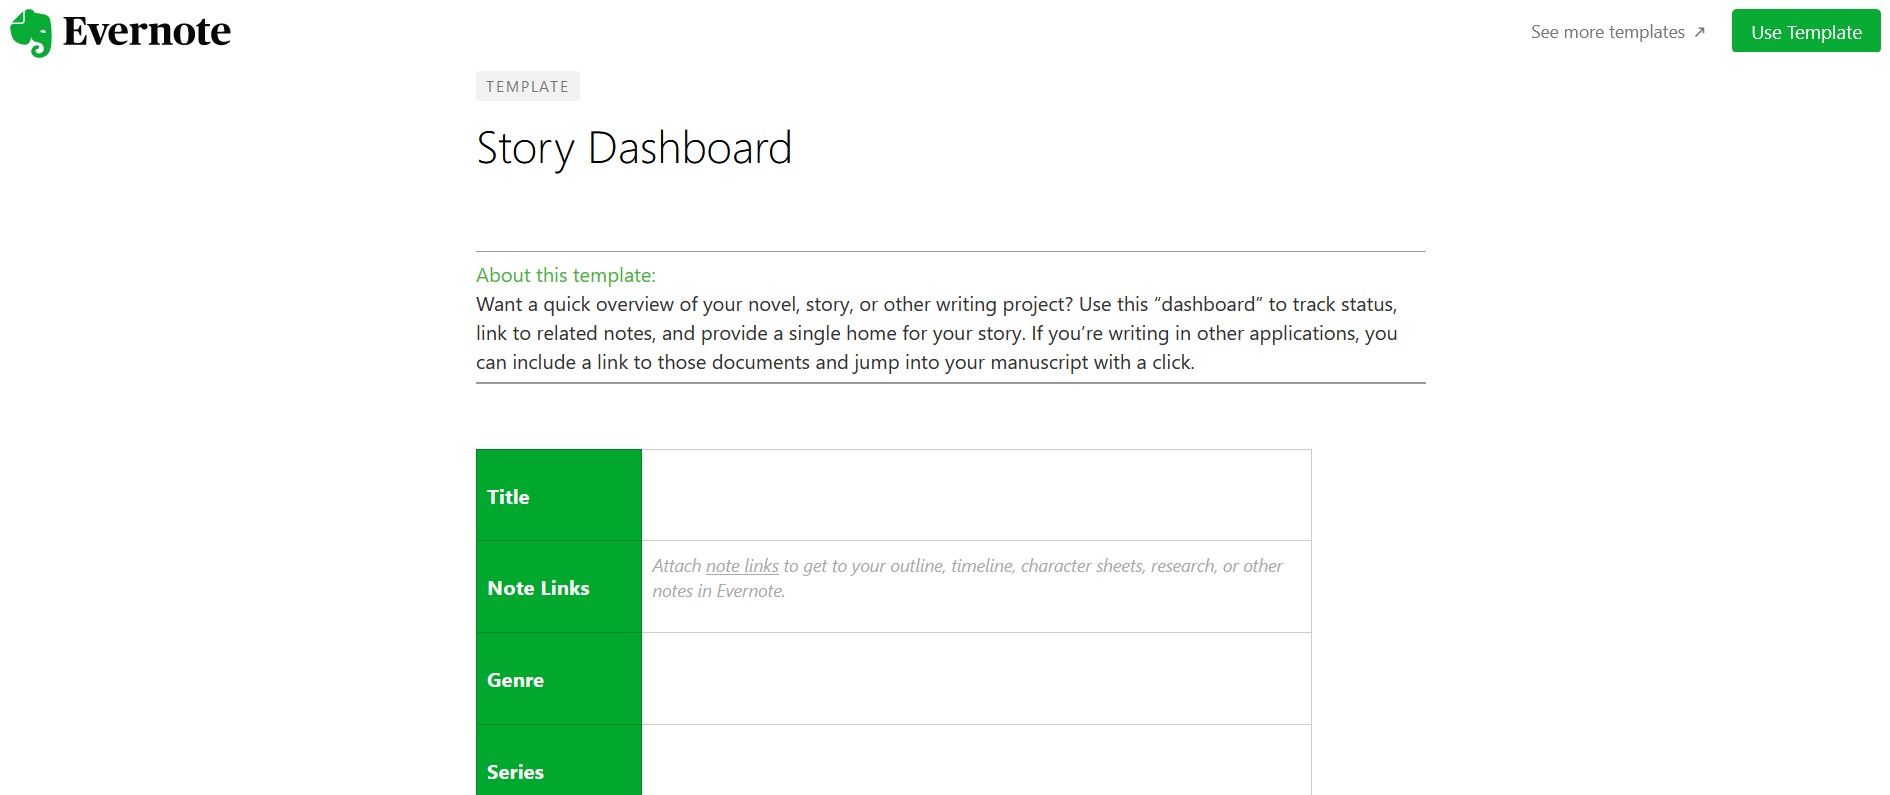 Evernote Story Dashboard Template for Creative Writers